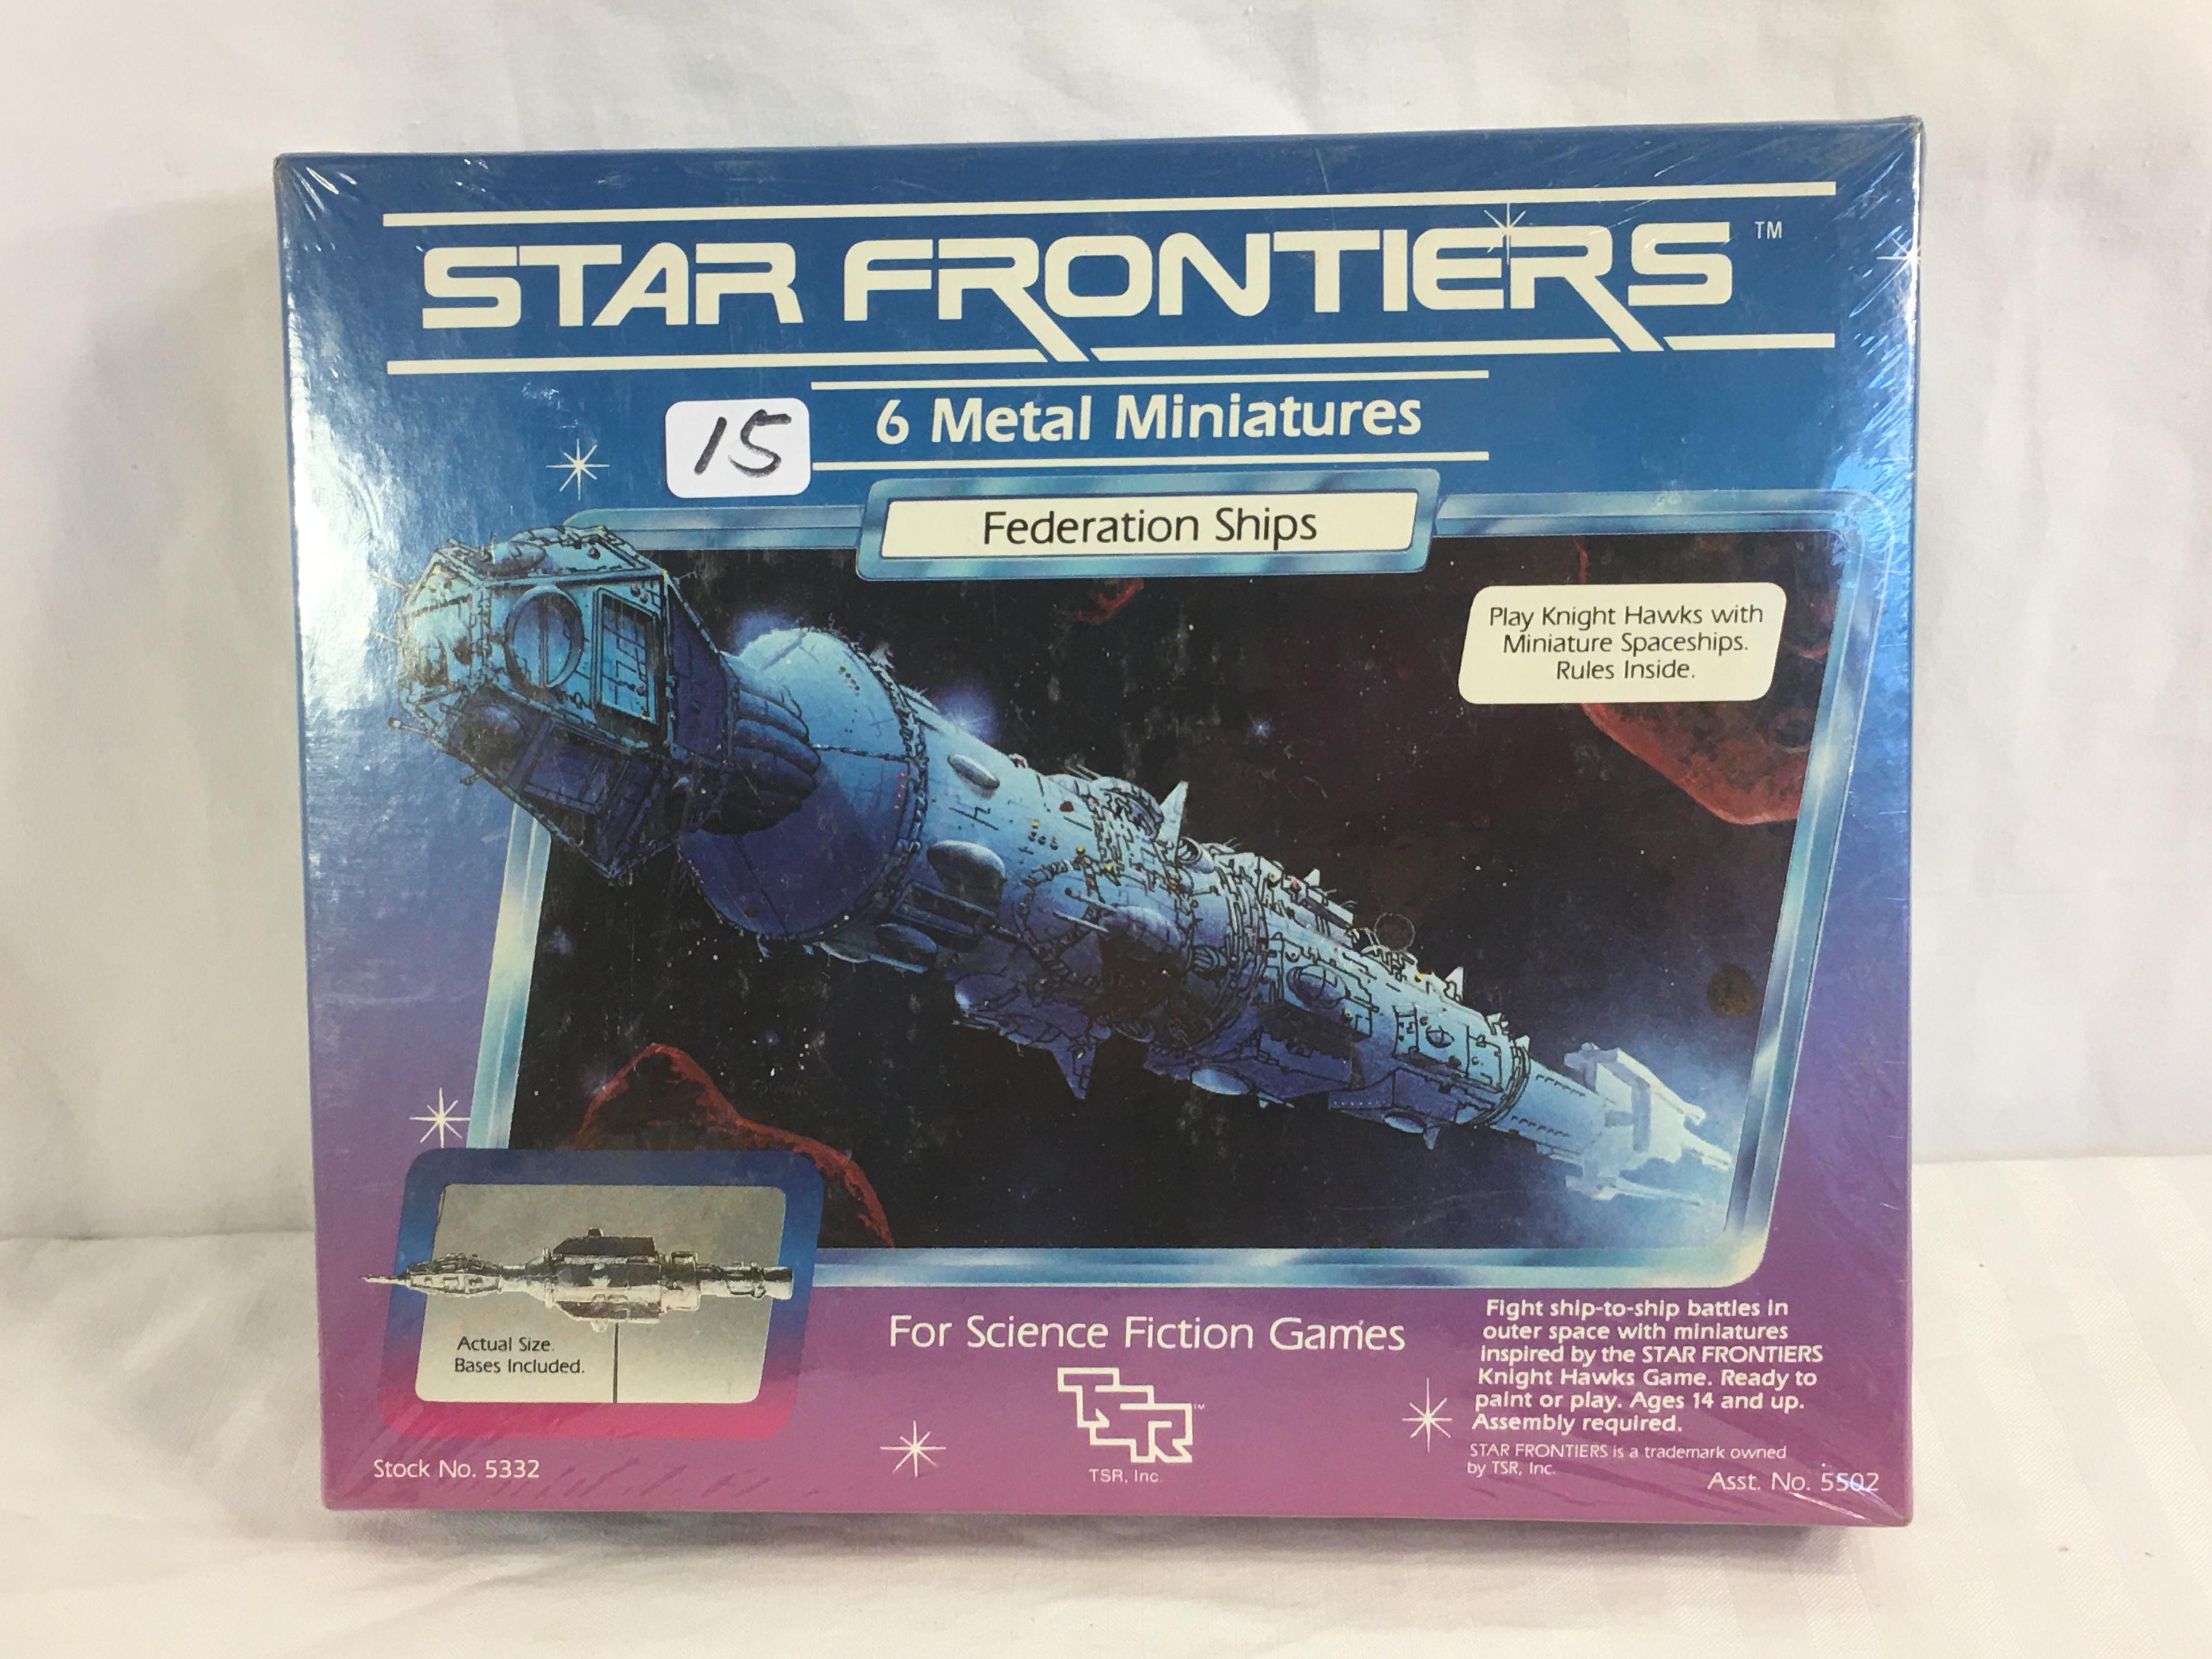 Collector TSR Star Frontier Federation Ships 6 Metal Minmiatures #5502  8.5"BY7" Box Size